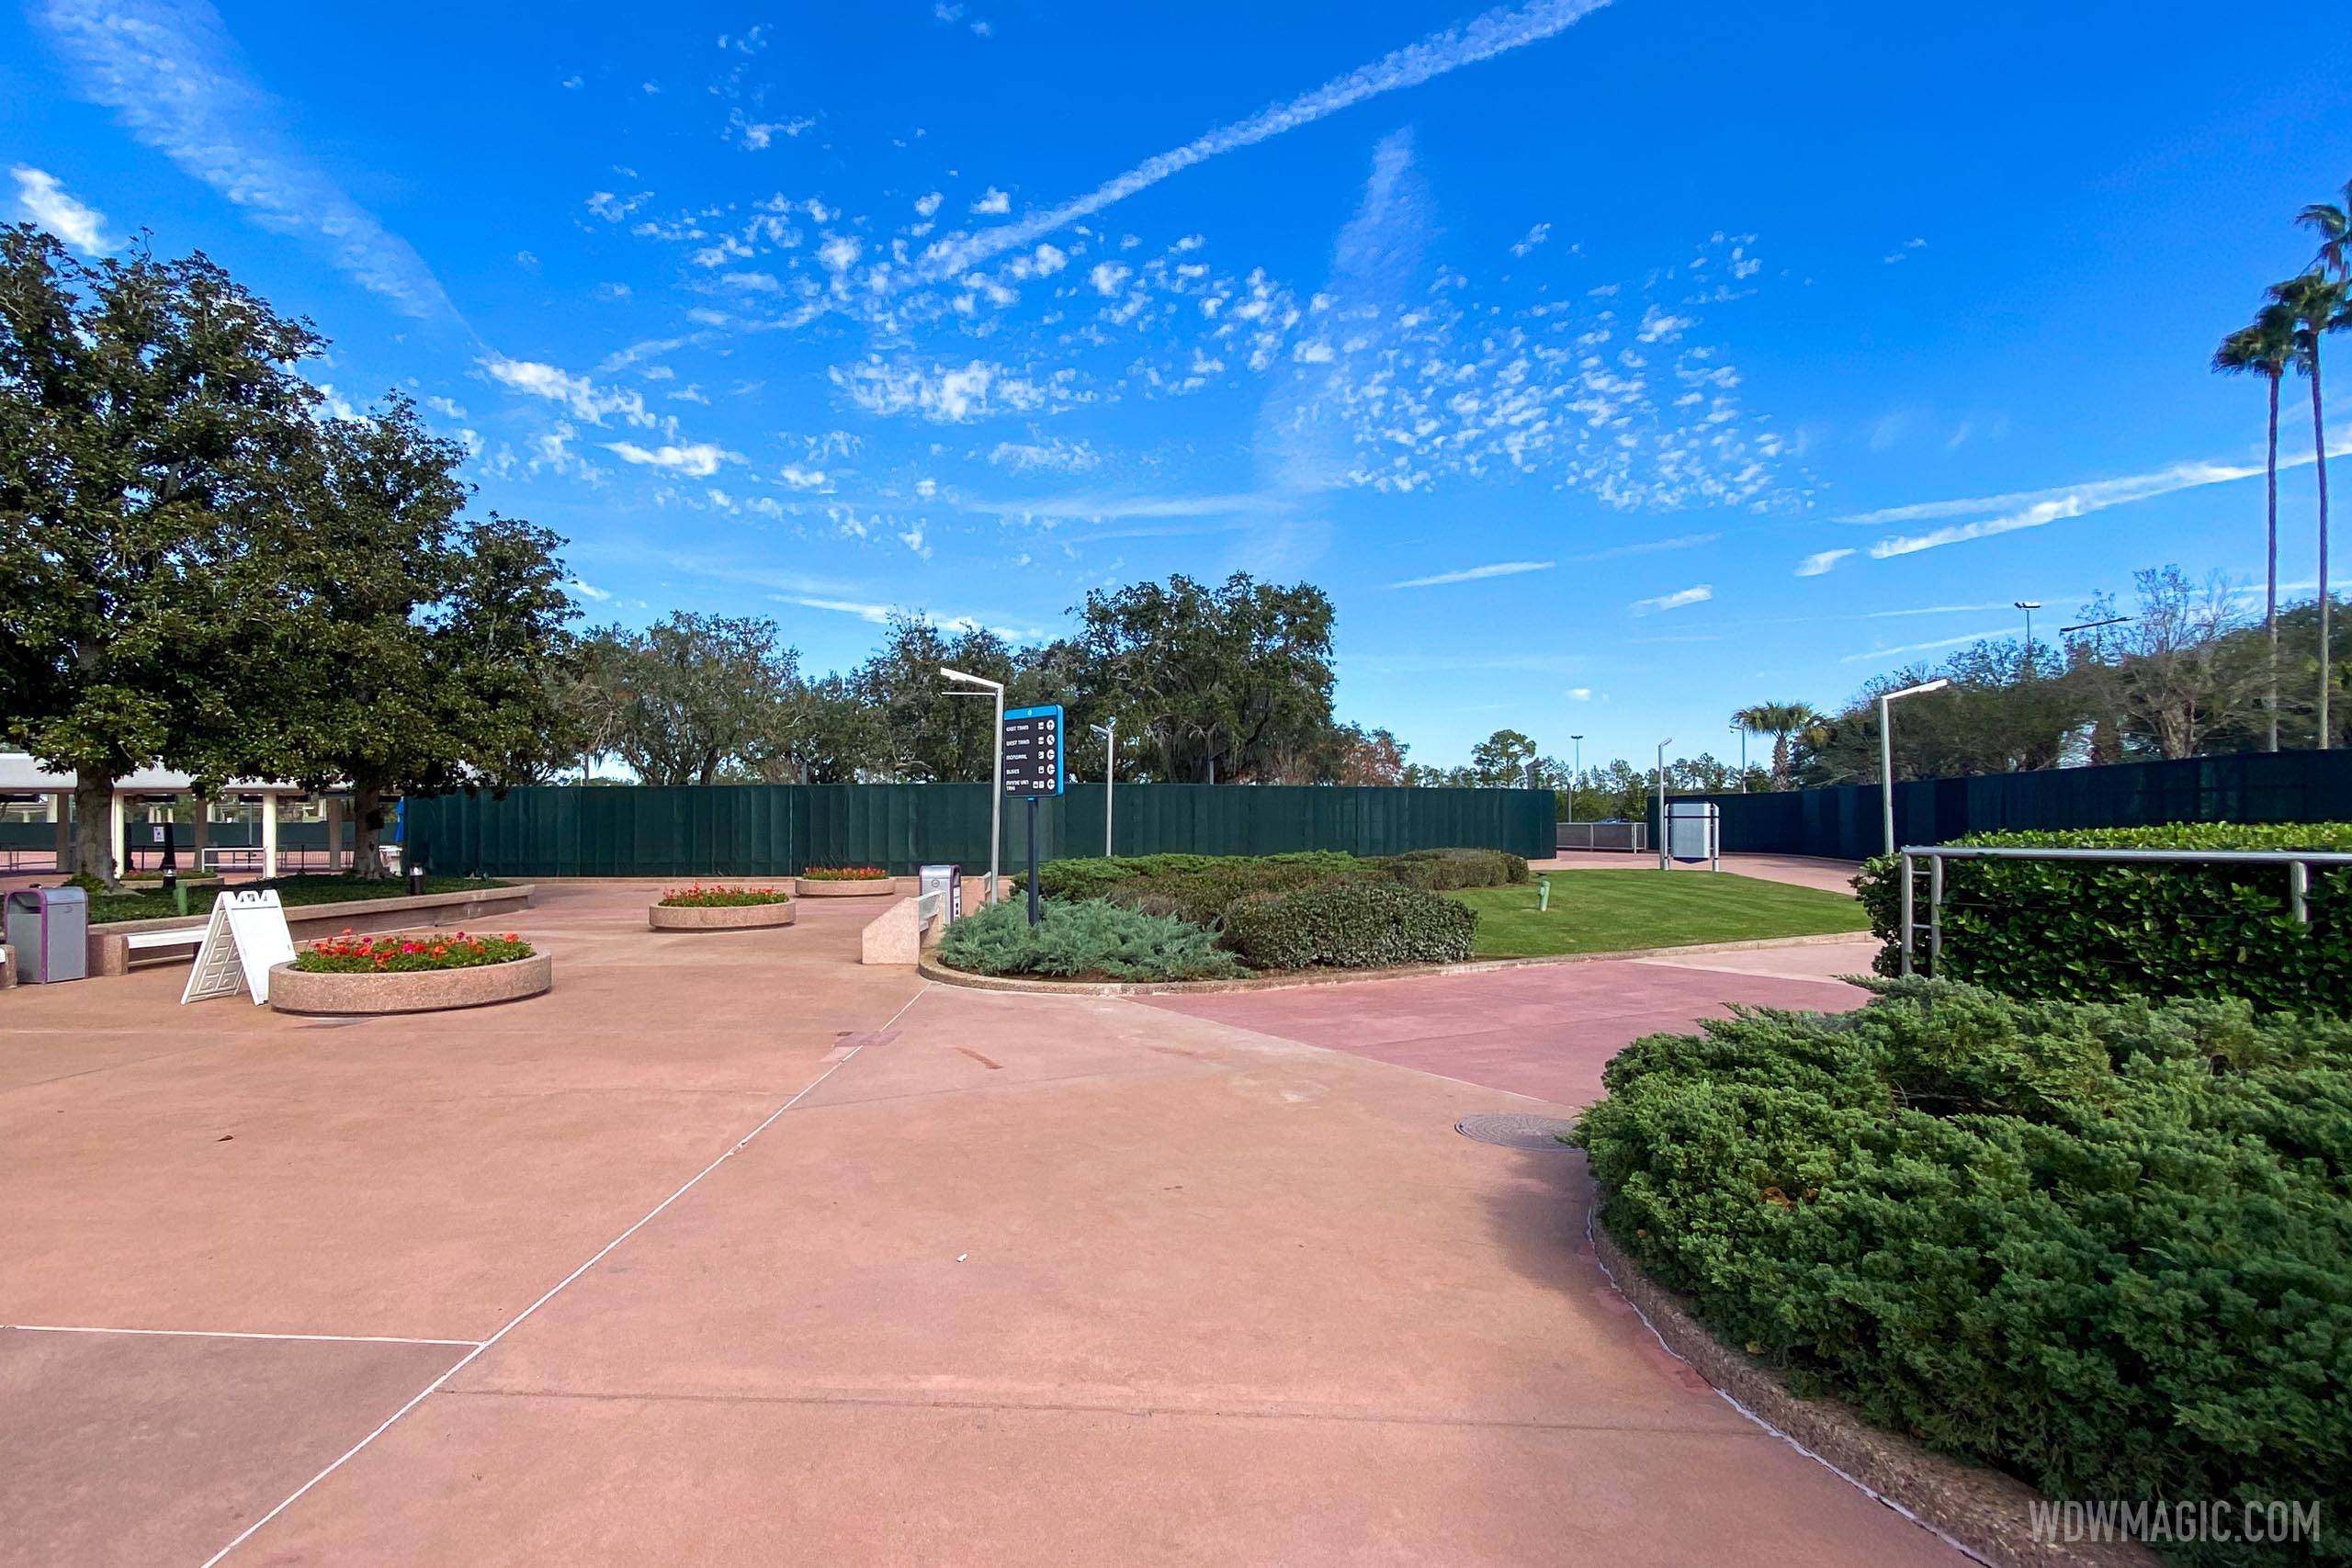 PHOTOS - Construction underway on new Leave a Legacy at EPCOT